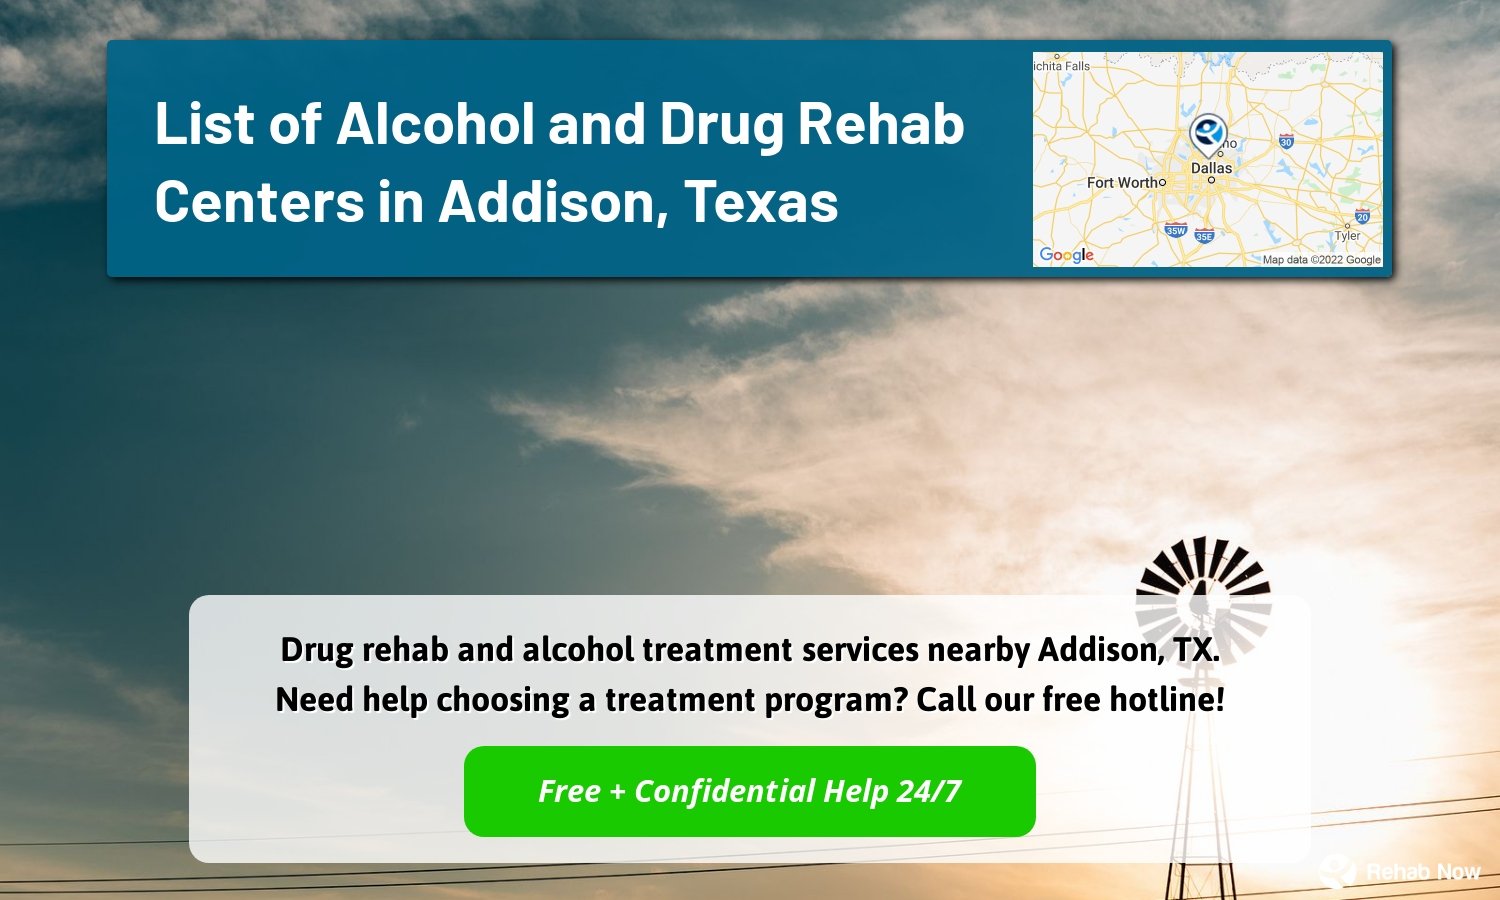 Drug rehab and alcohol treatment services nearby Addison, TX. Need help choosing a treatment program? Call our free hotline!